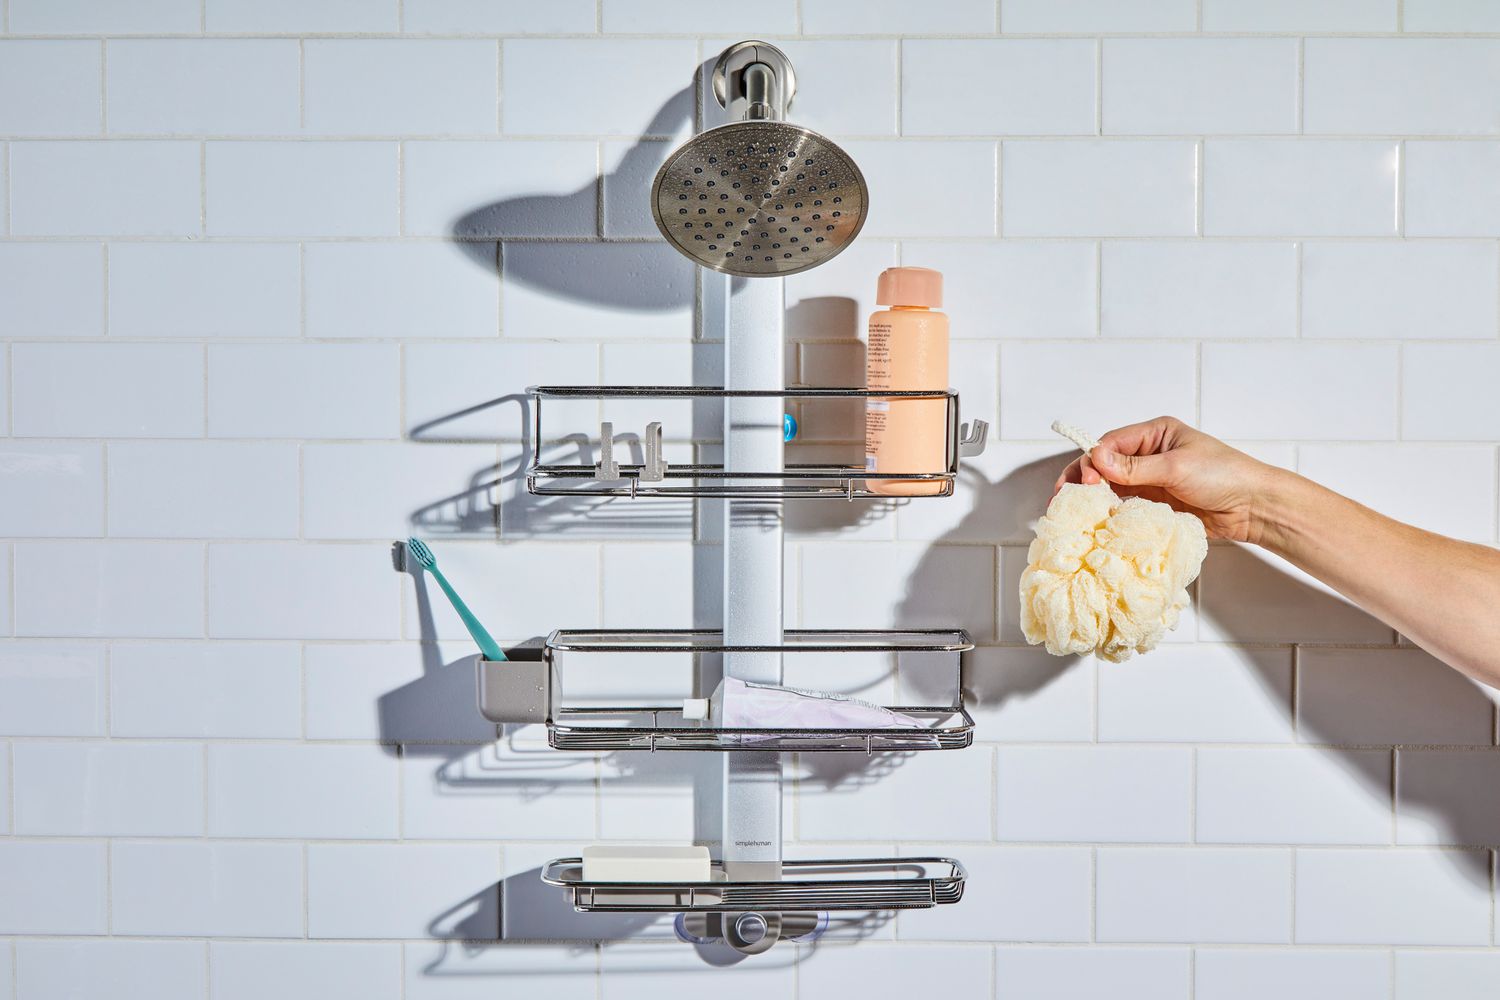 How To Prevent Shower Caddy From Falling